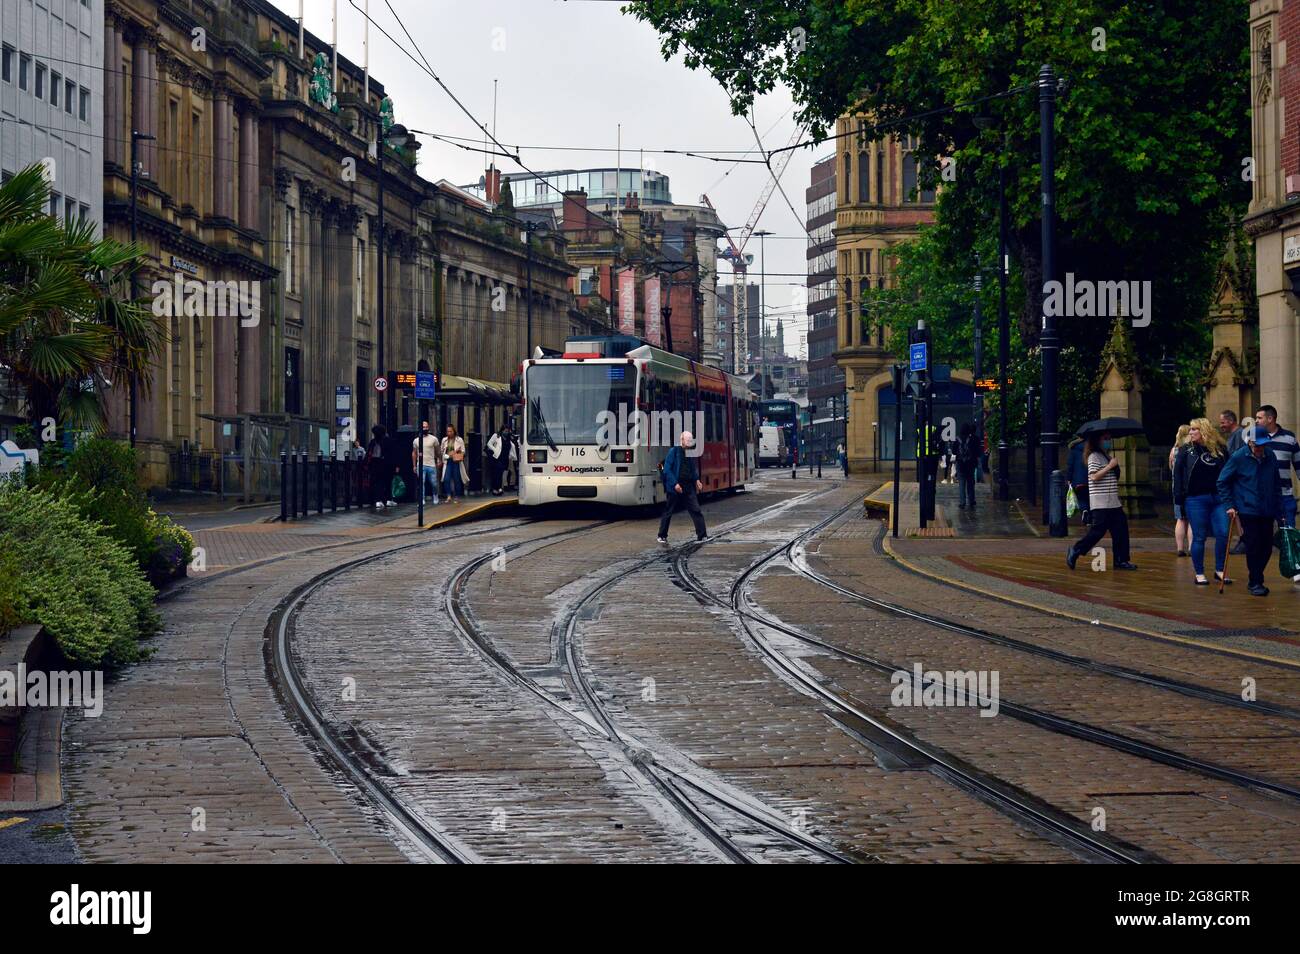 SHEFFIELD. SOUTH YORKSHIRE. ENGLAND. 07-10-21. High Street, the Cathedral tramstop  in the city centre. The cobbles are wet from a recent rain shower. Stock Photo